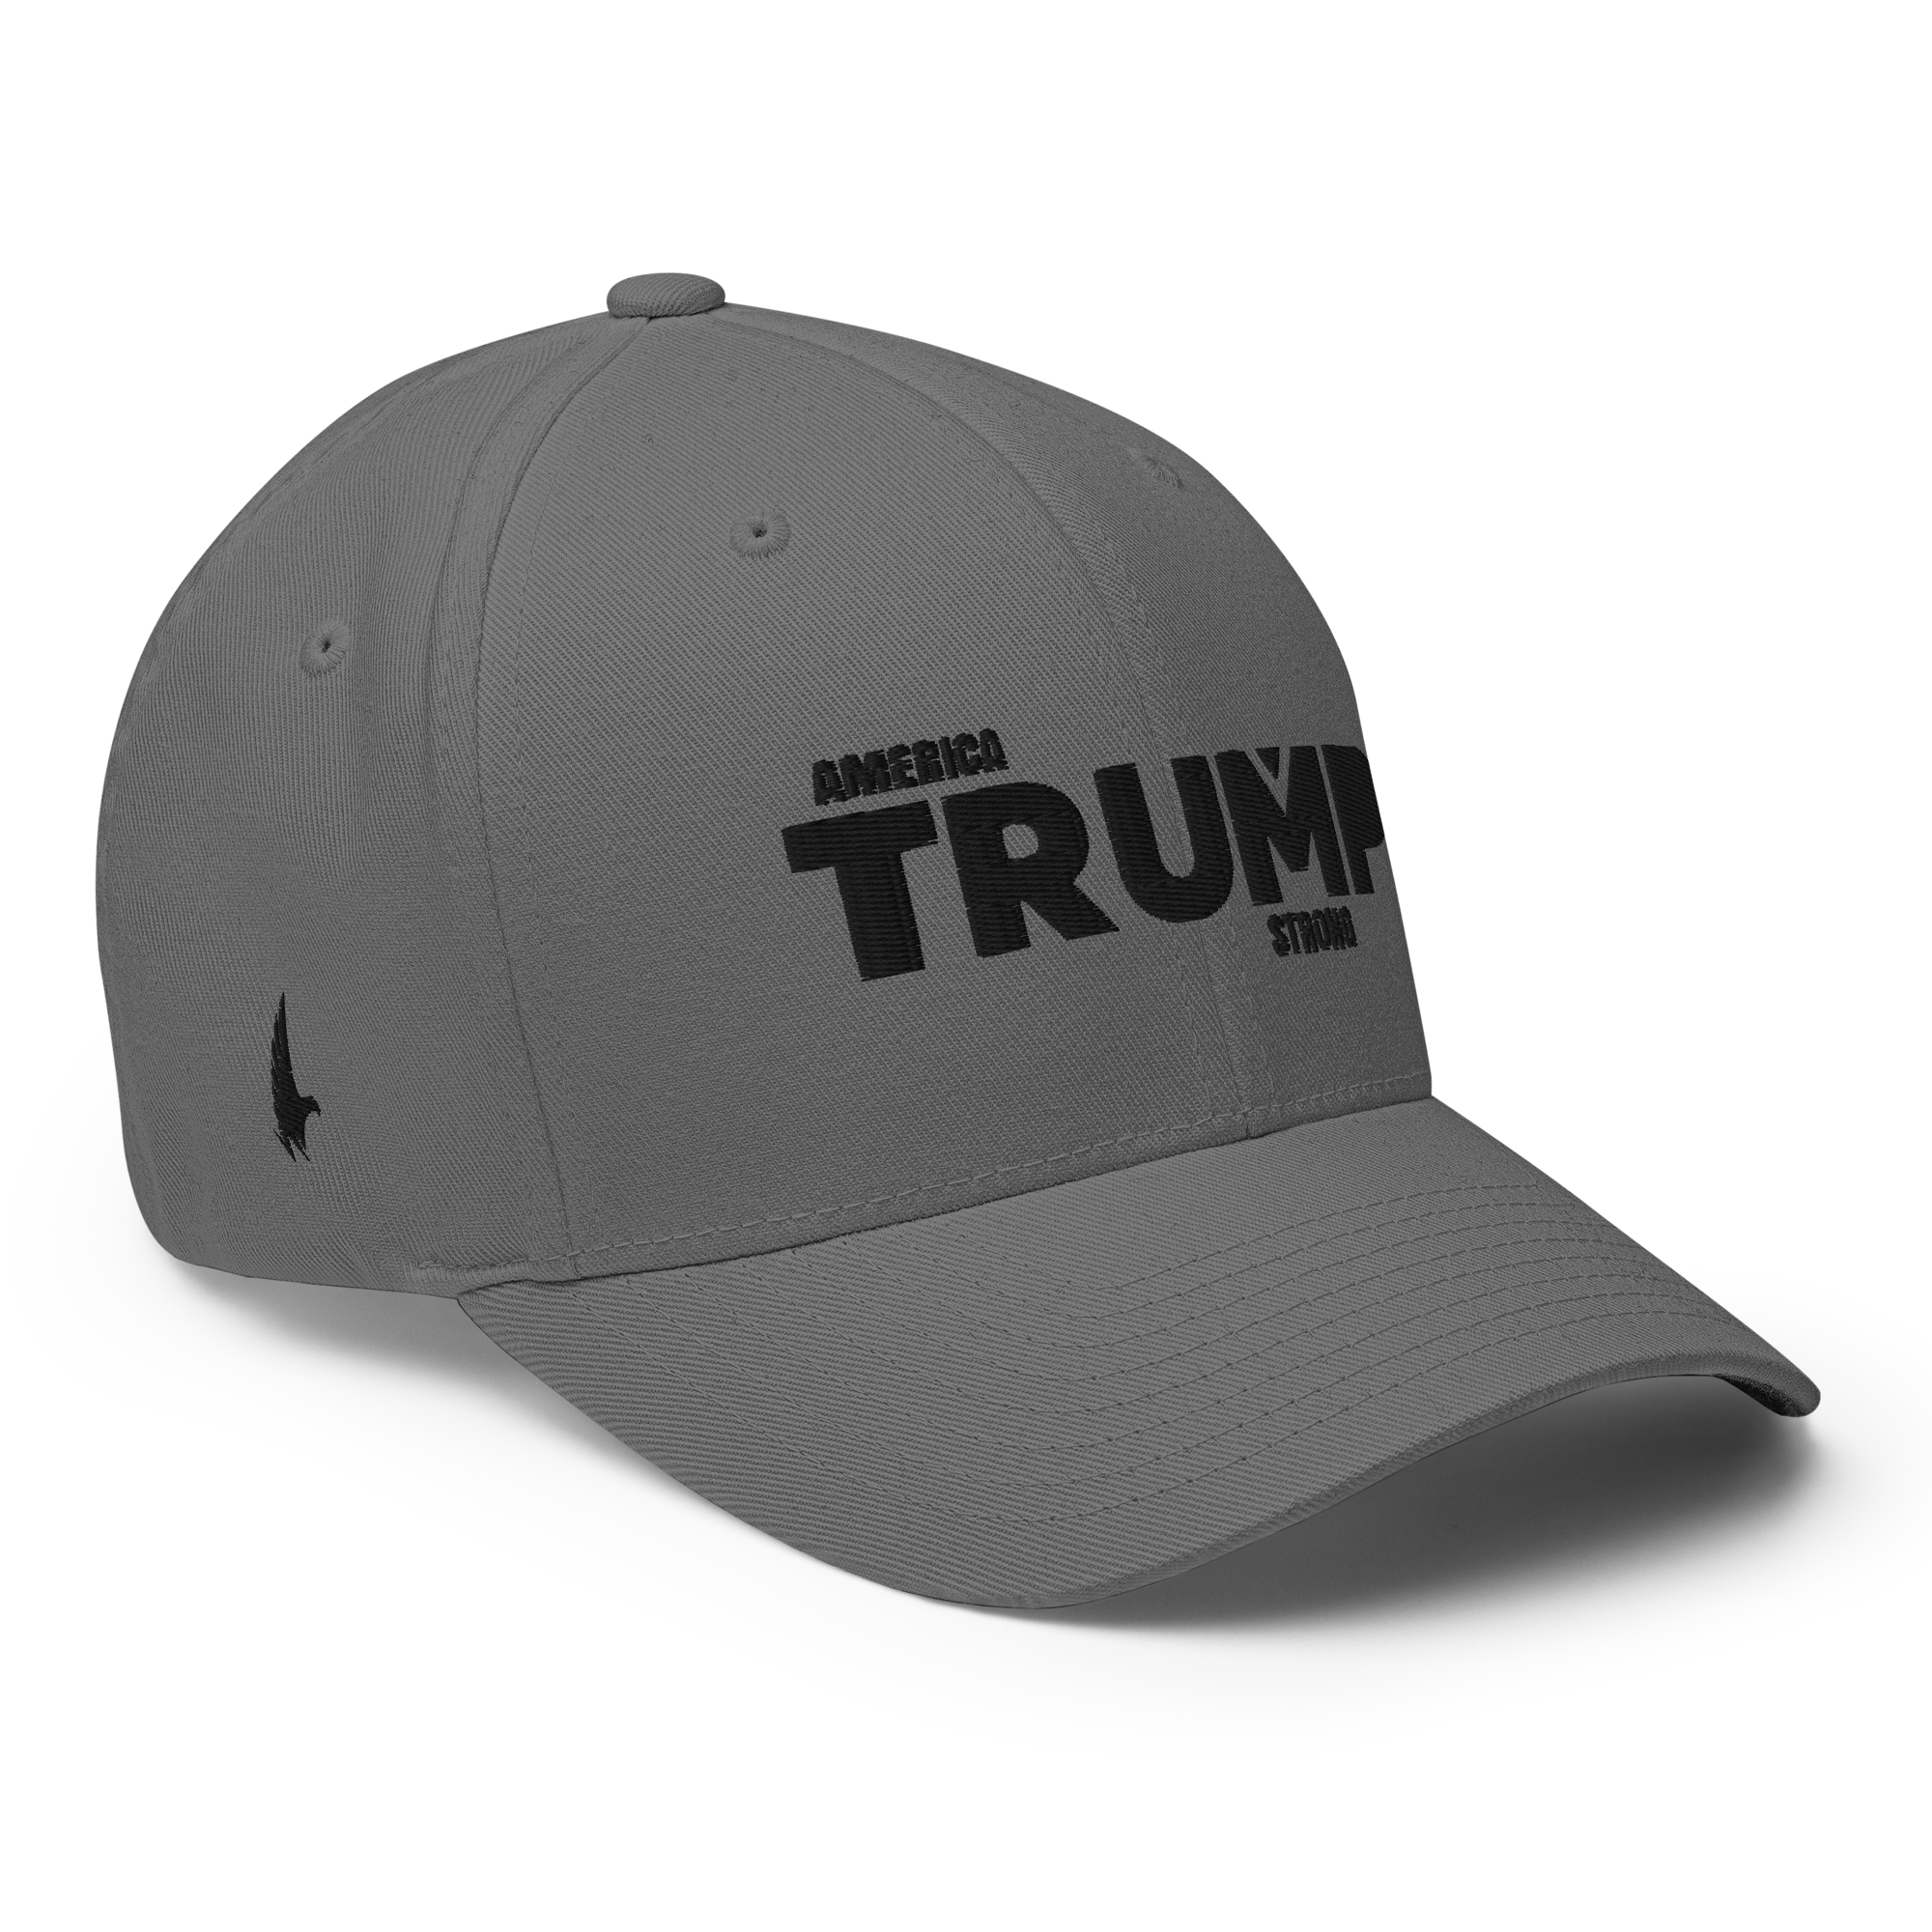 America Strong Trump Flexfit Hat - Grey / Black Fitted - Loyalty Vibes